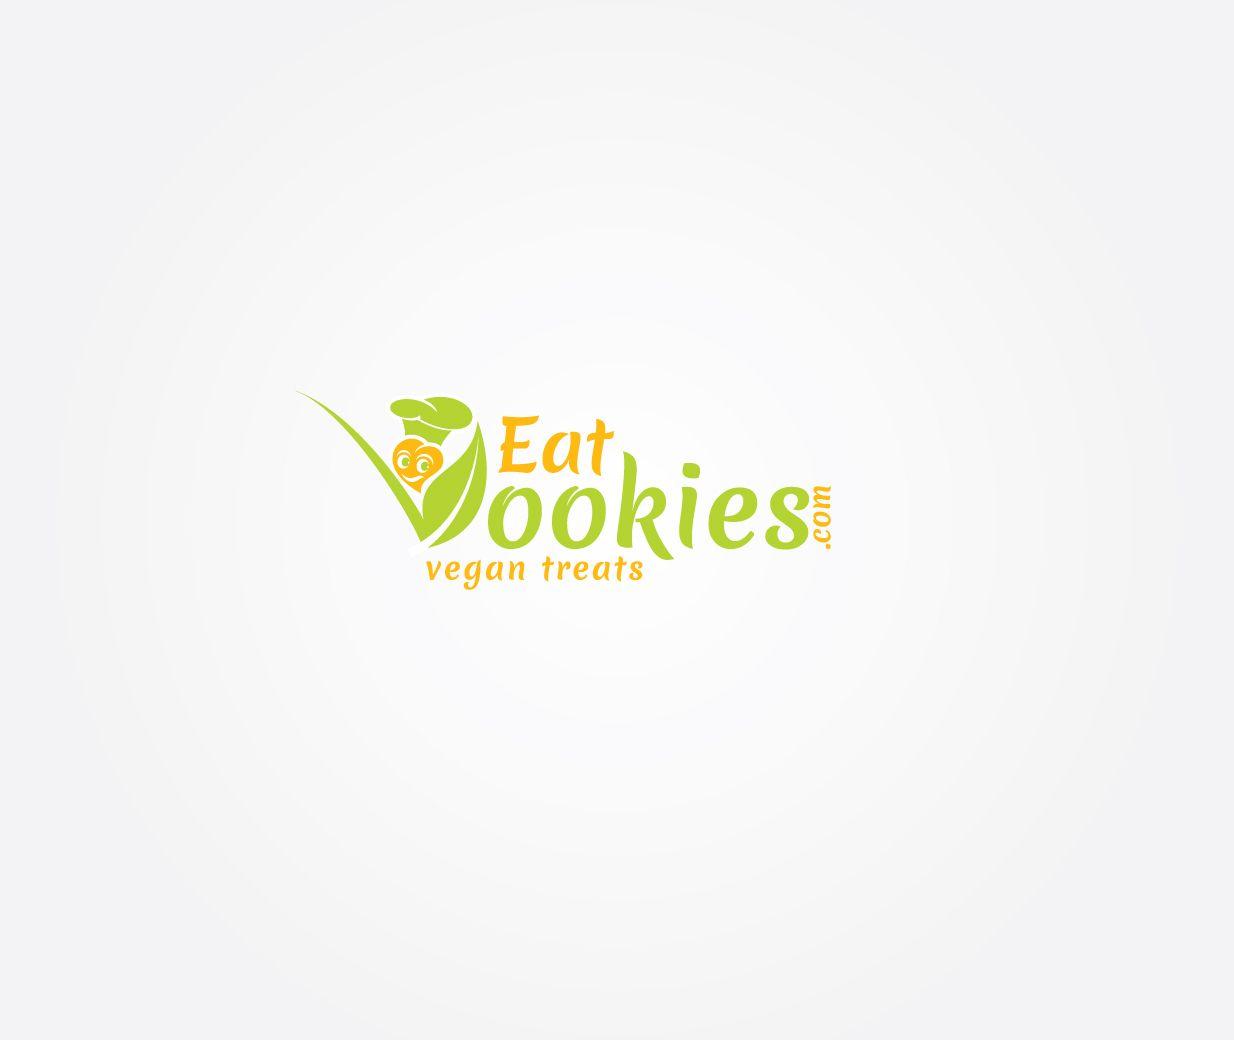 Info Please Logo - Personable, Colorful, Small Business Logo Design for EatVookies.com ...